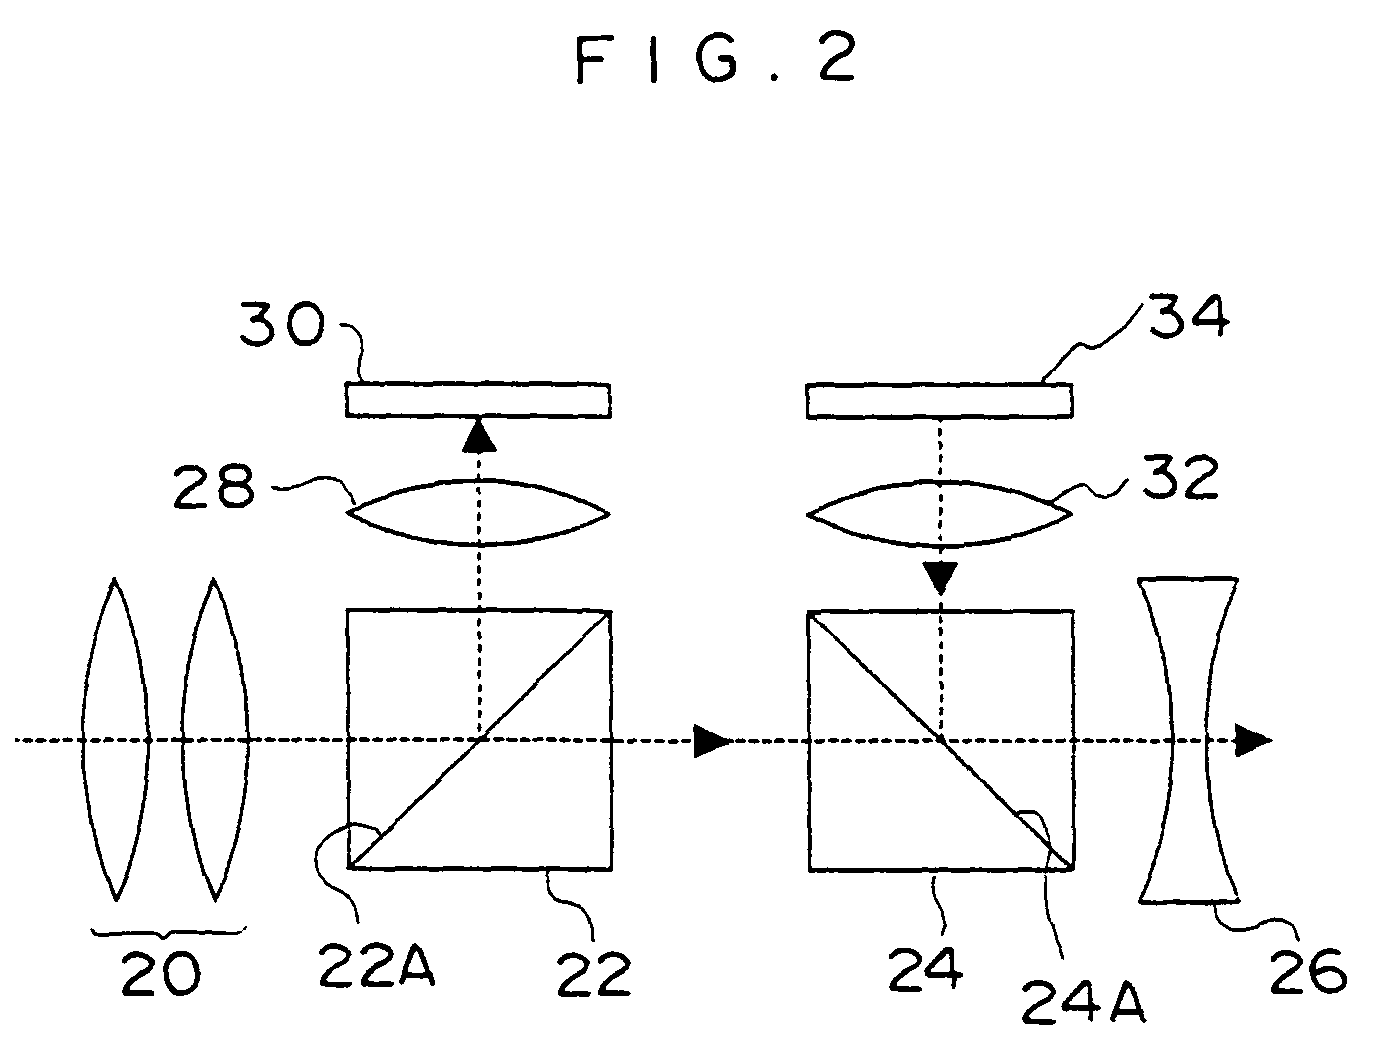 Image processing apparatus, method, and storage medium for removing noise from stereoscopic image pair